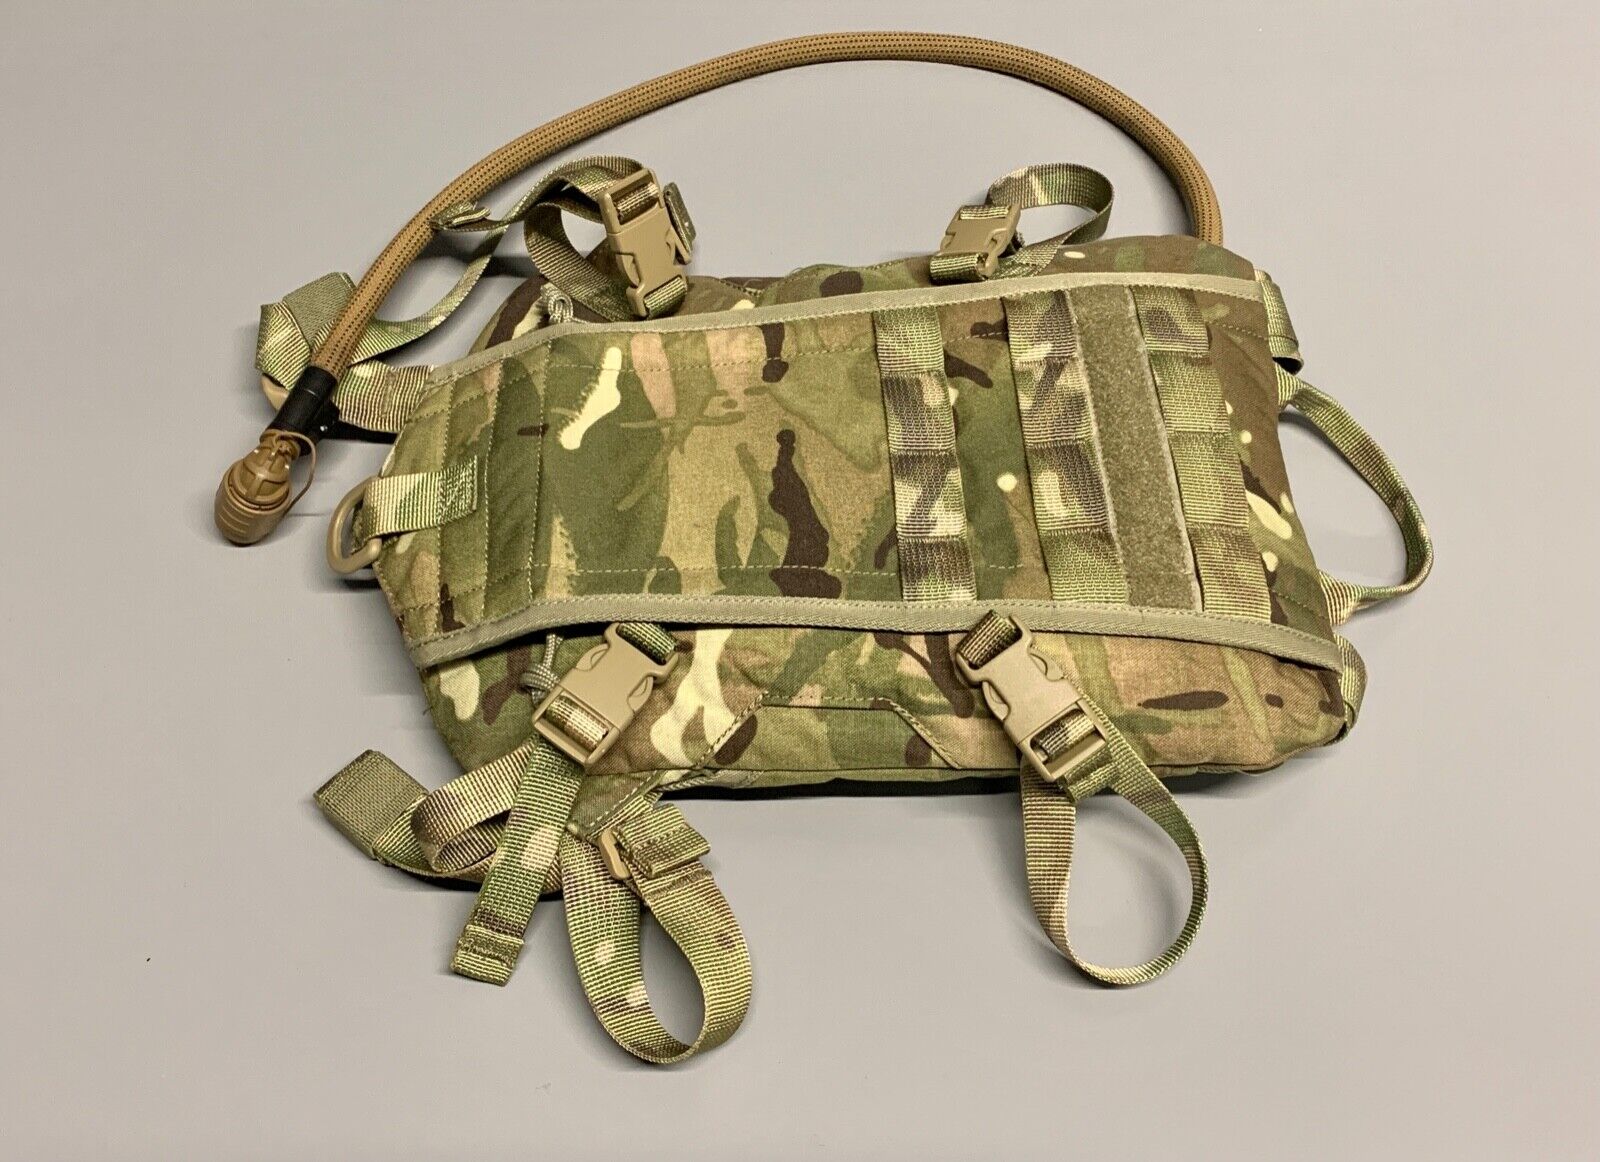 NEW British Army-Issue MTP 3L Rider Hydration Pack.